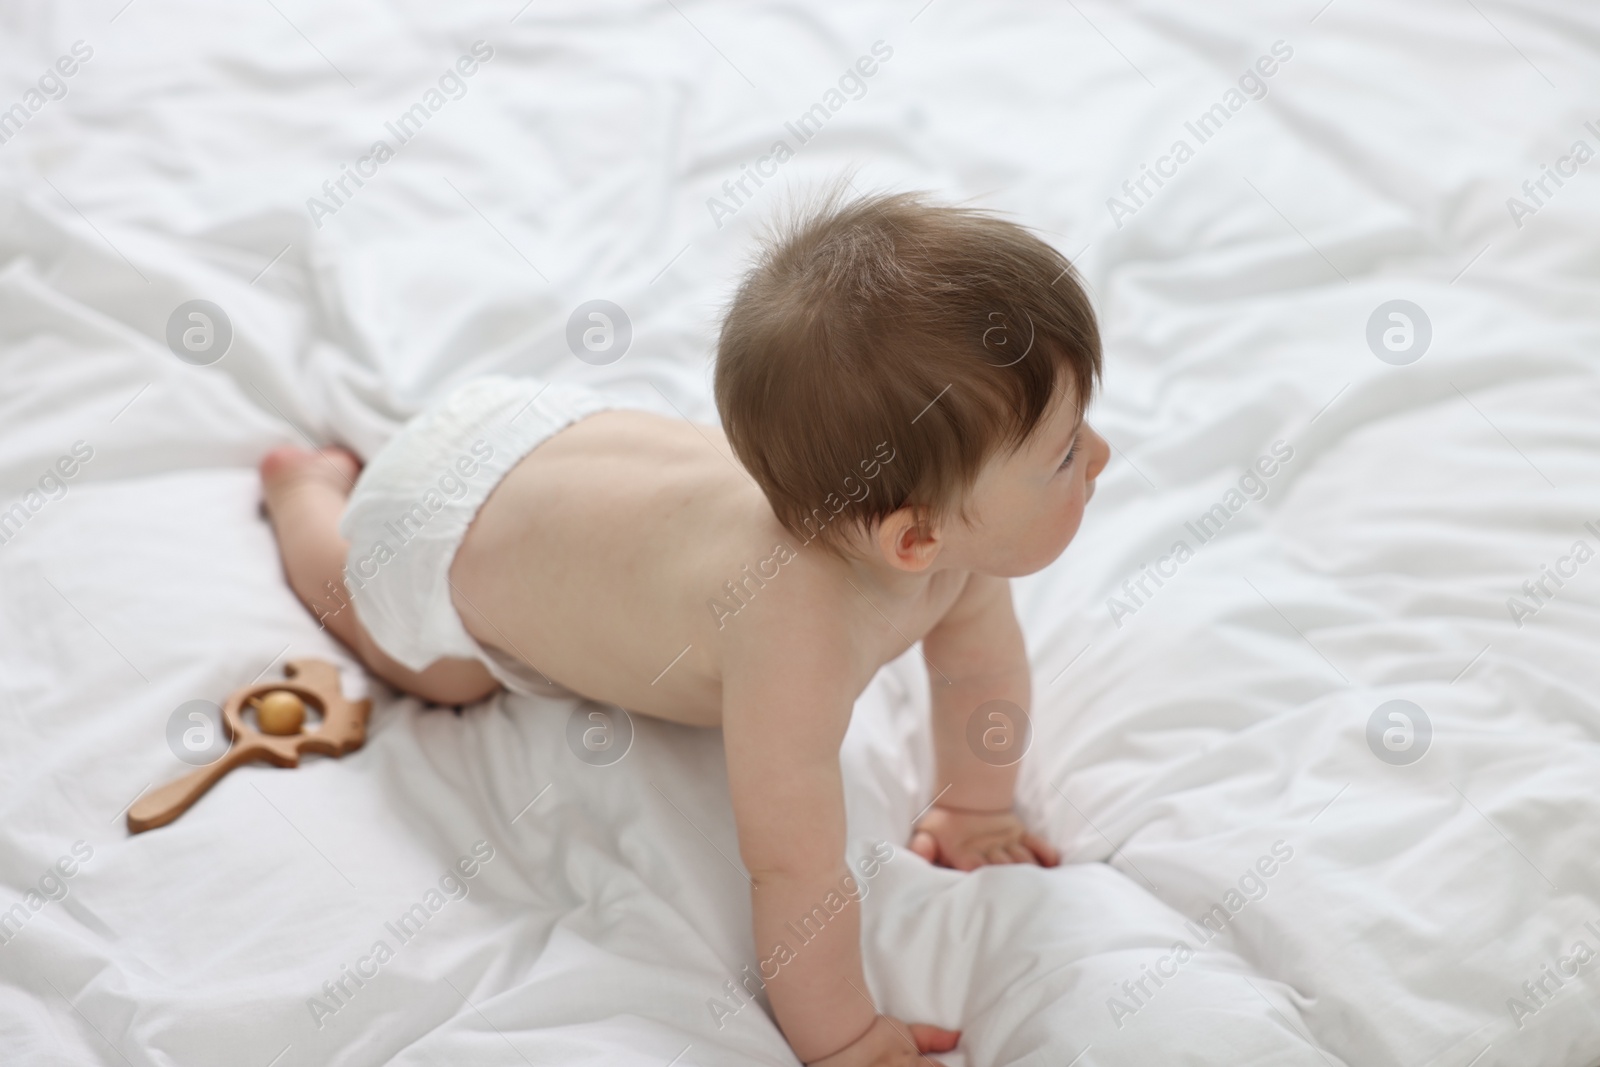 Photo of Baby boy in diaper crawling on bed